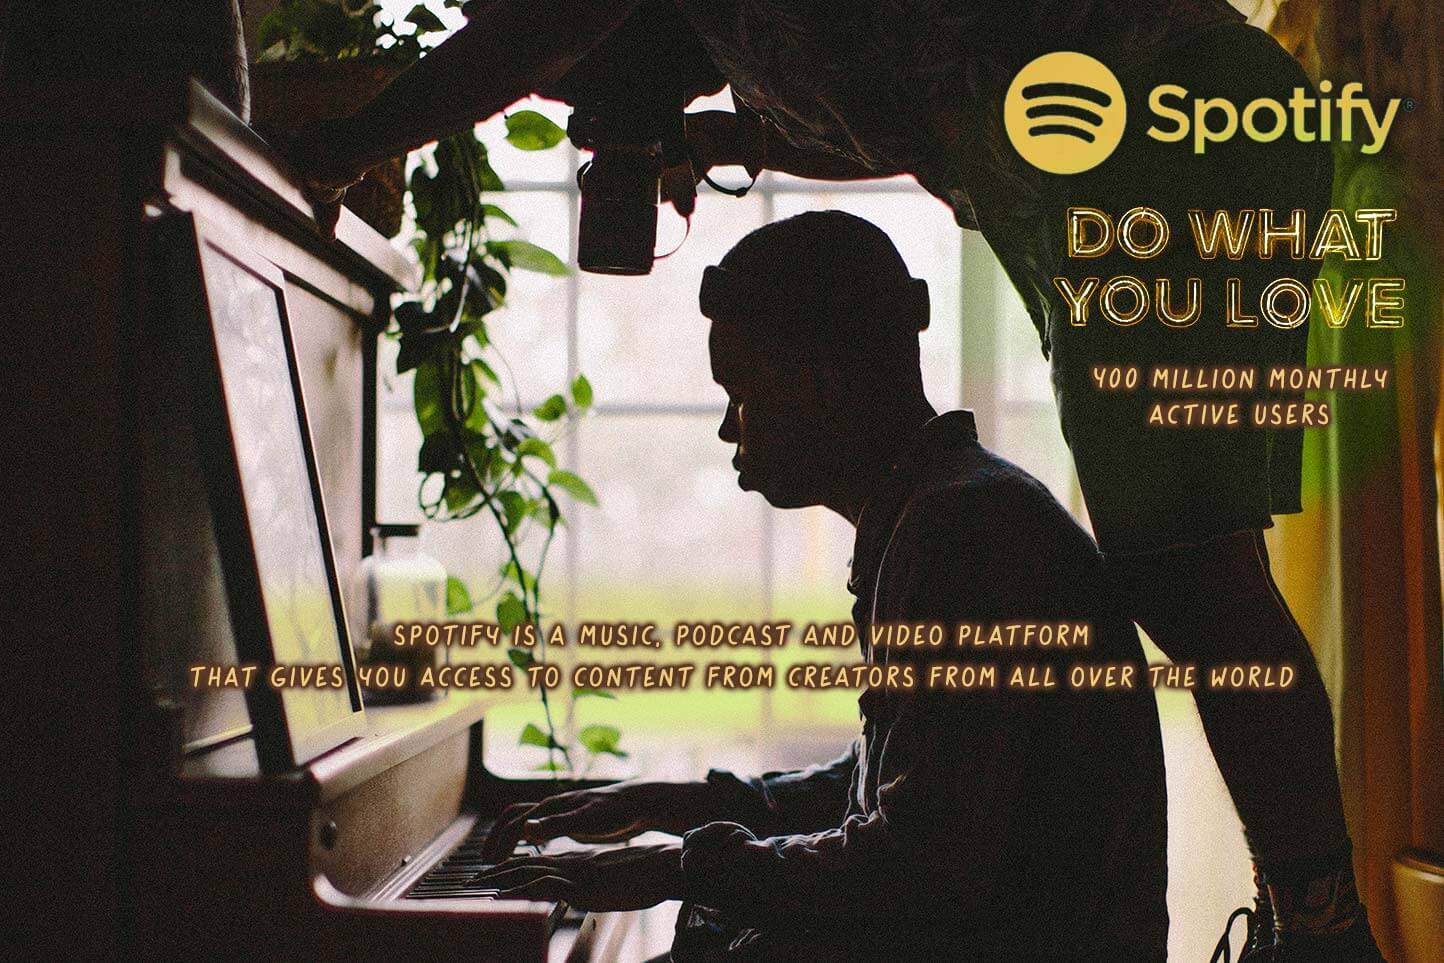 man-playing-piano-with-spotify-brand